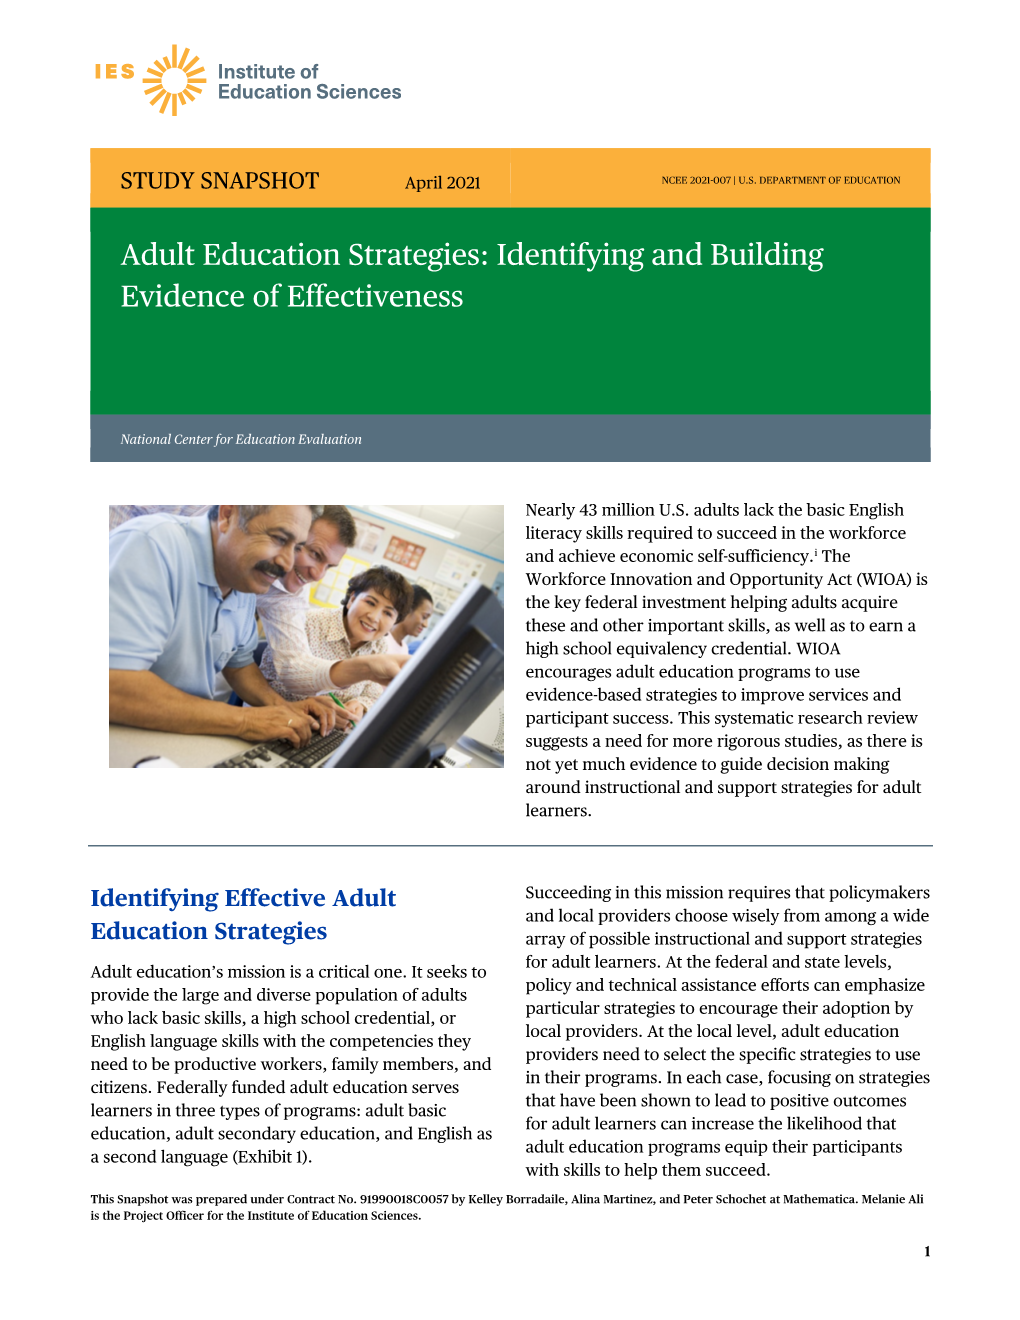 Adult Education Strategies: Identifying and Building Evidence of Effectiveness